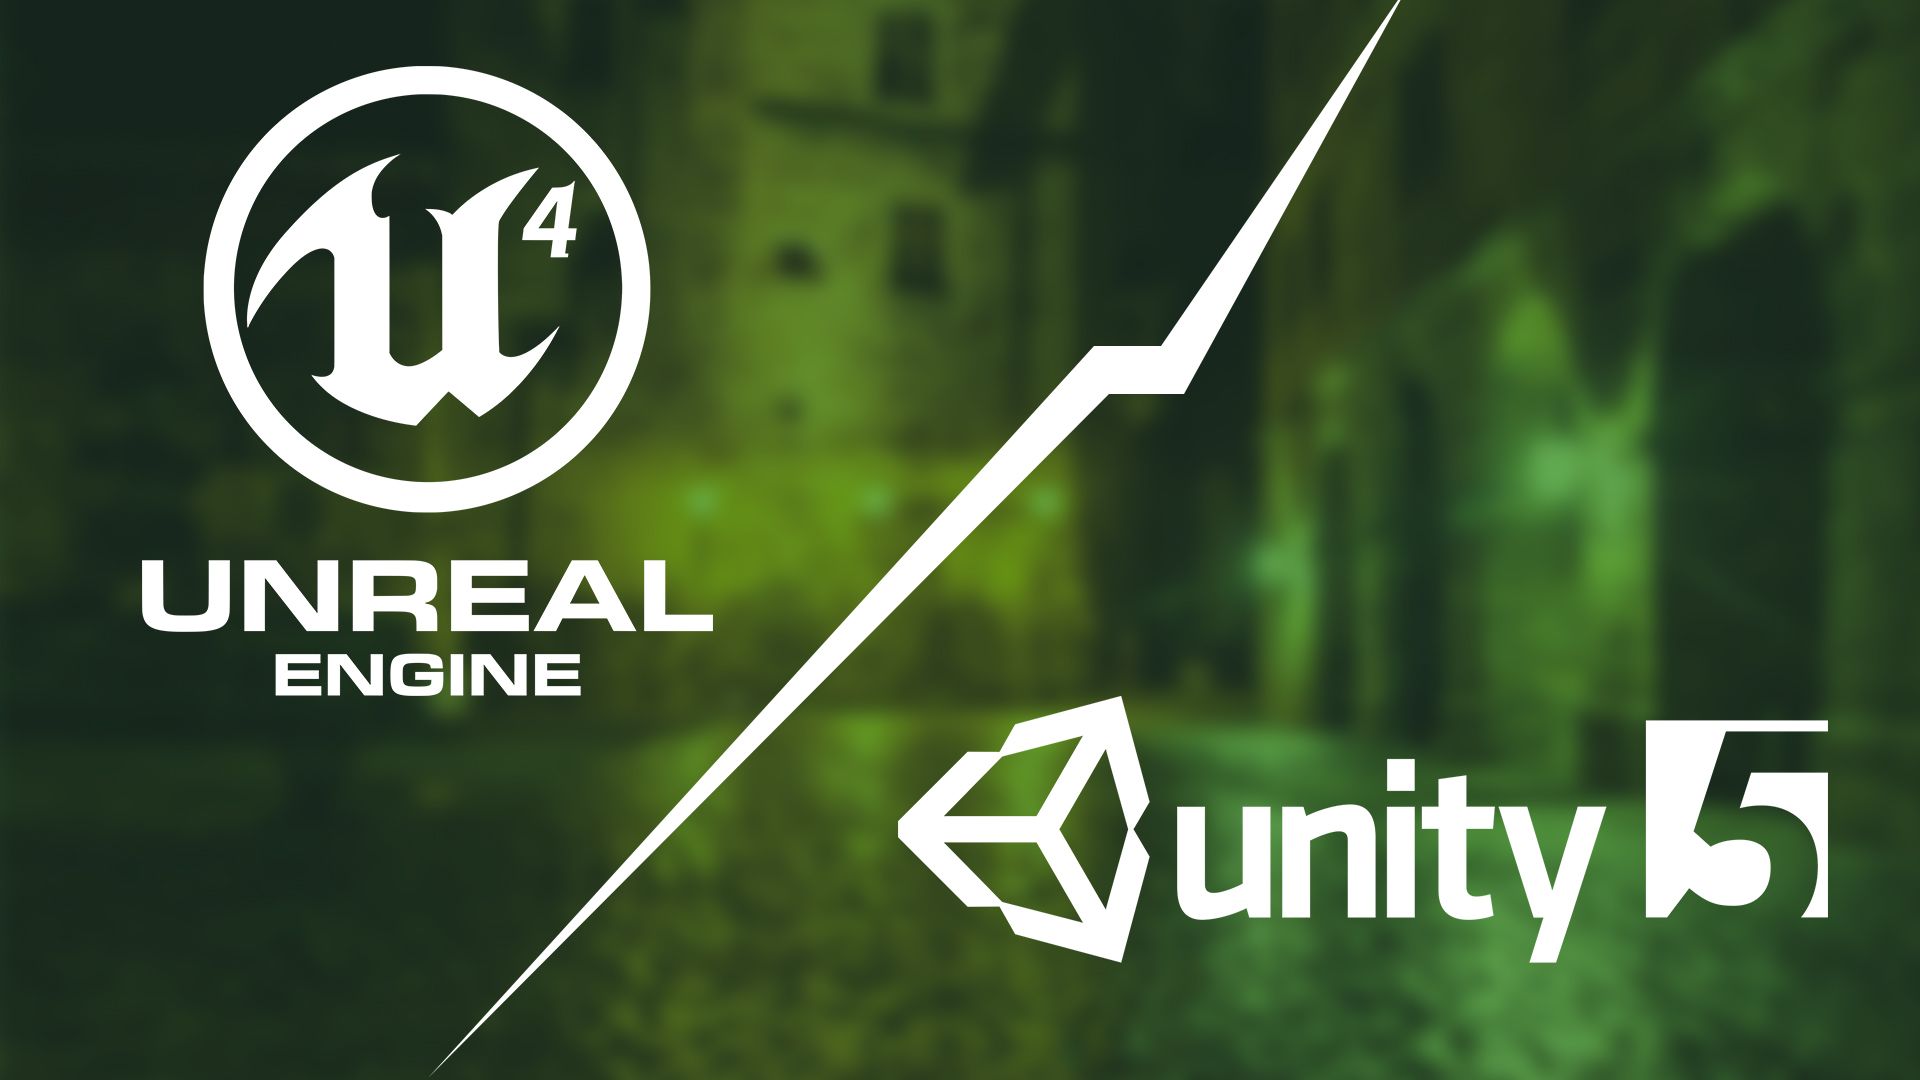 Unreal Engine 4 vs Unity 5: Which Game Engine Is Better?